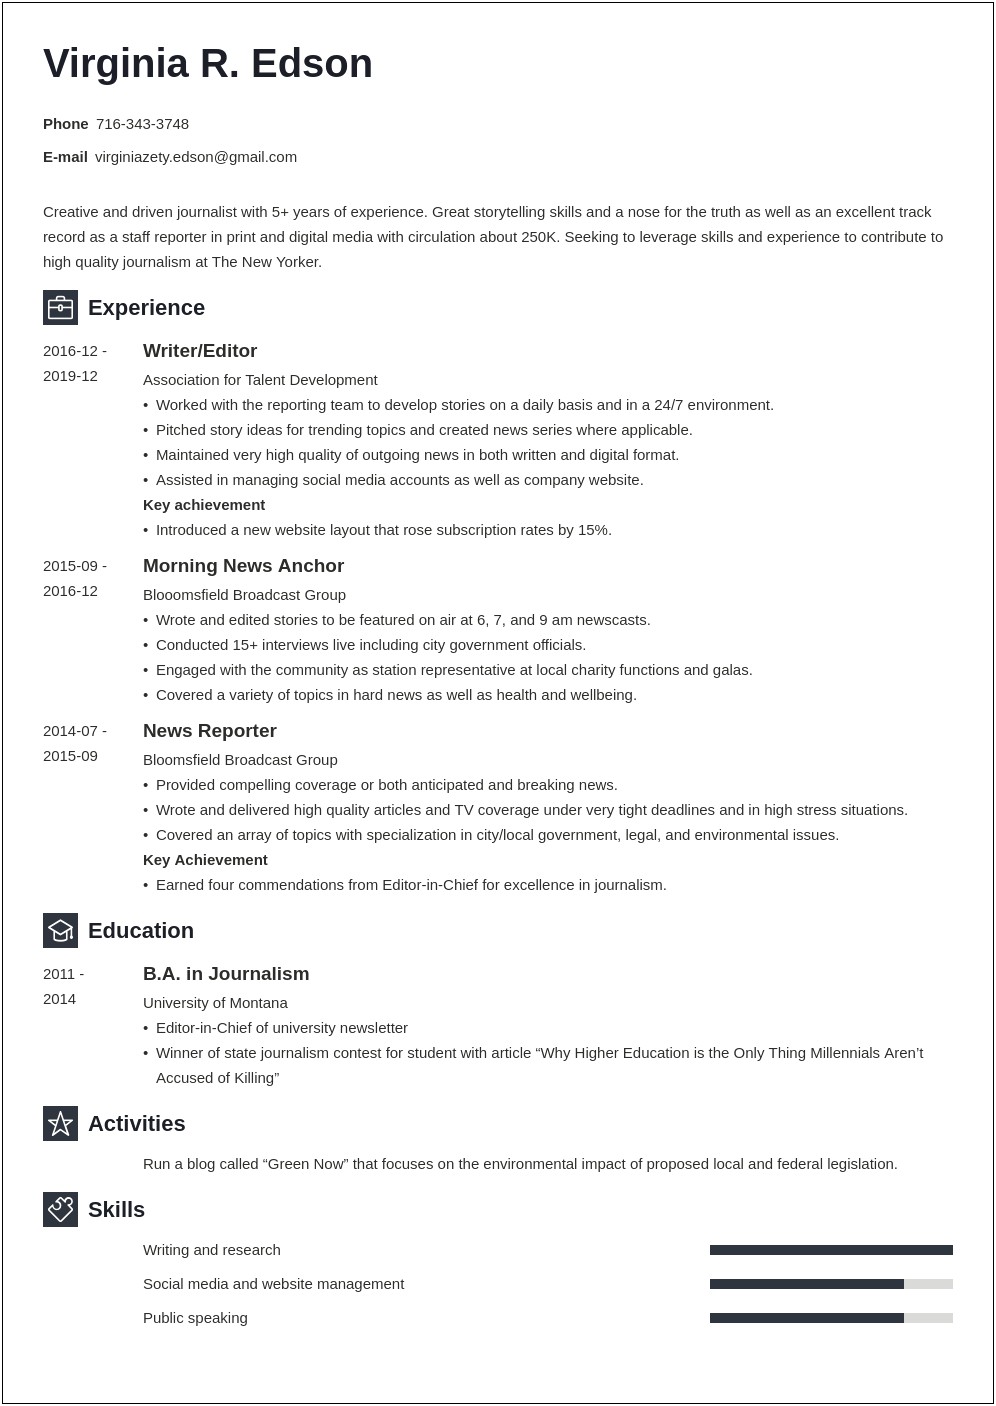 Resume Summary For Digital Printing Services